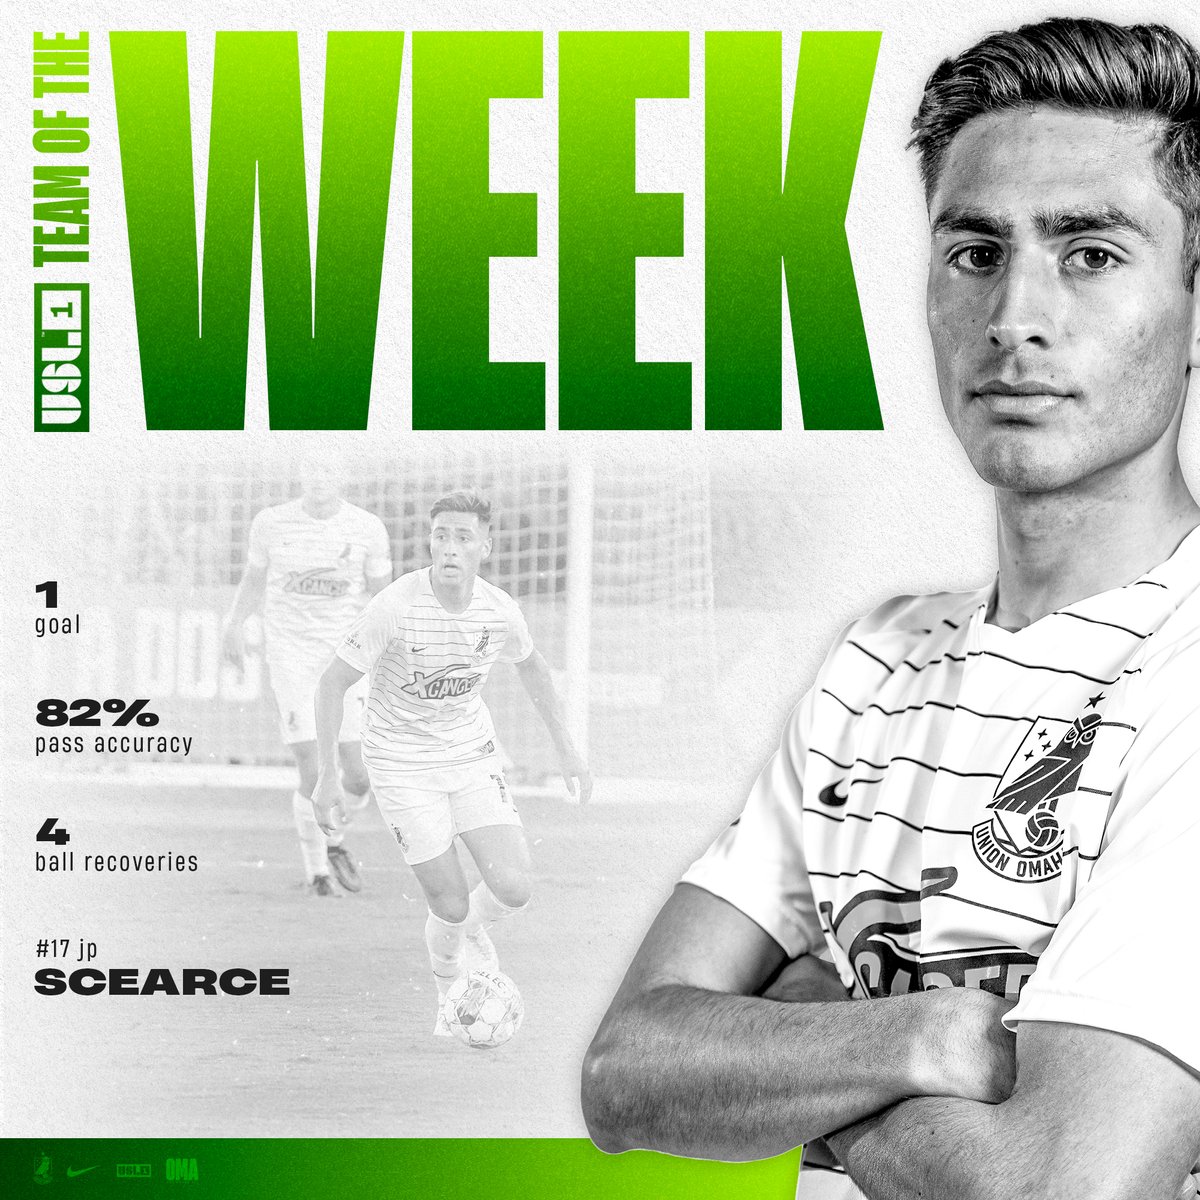 🏅 Saturday night's goal scorer, @jpscearce97, earns his third 𝗧𝗲𝗮𝗺 𝗼𝗳 𝘁𝗵𝗲 𝗪𝗲𝗲𝗸 appearance after another solid outing in the midfield 💪 #OneMeansAll